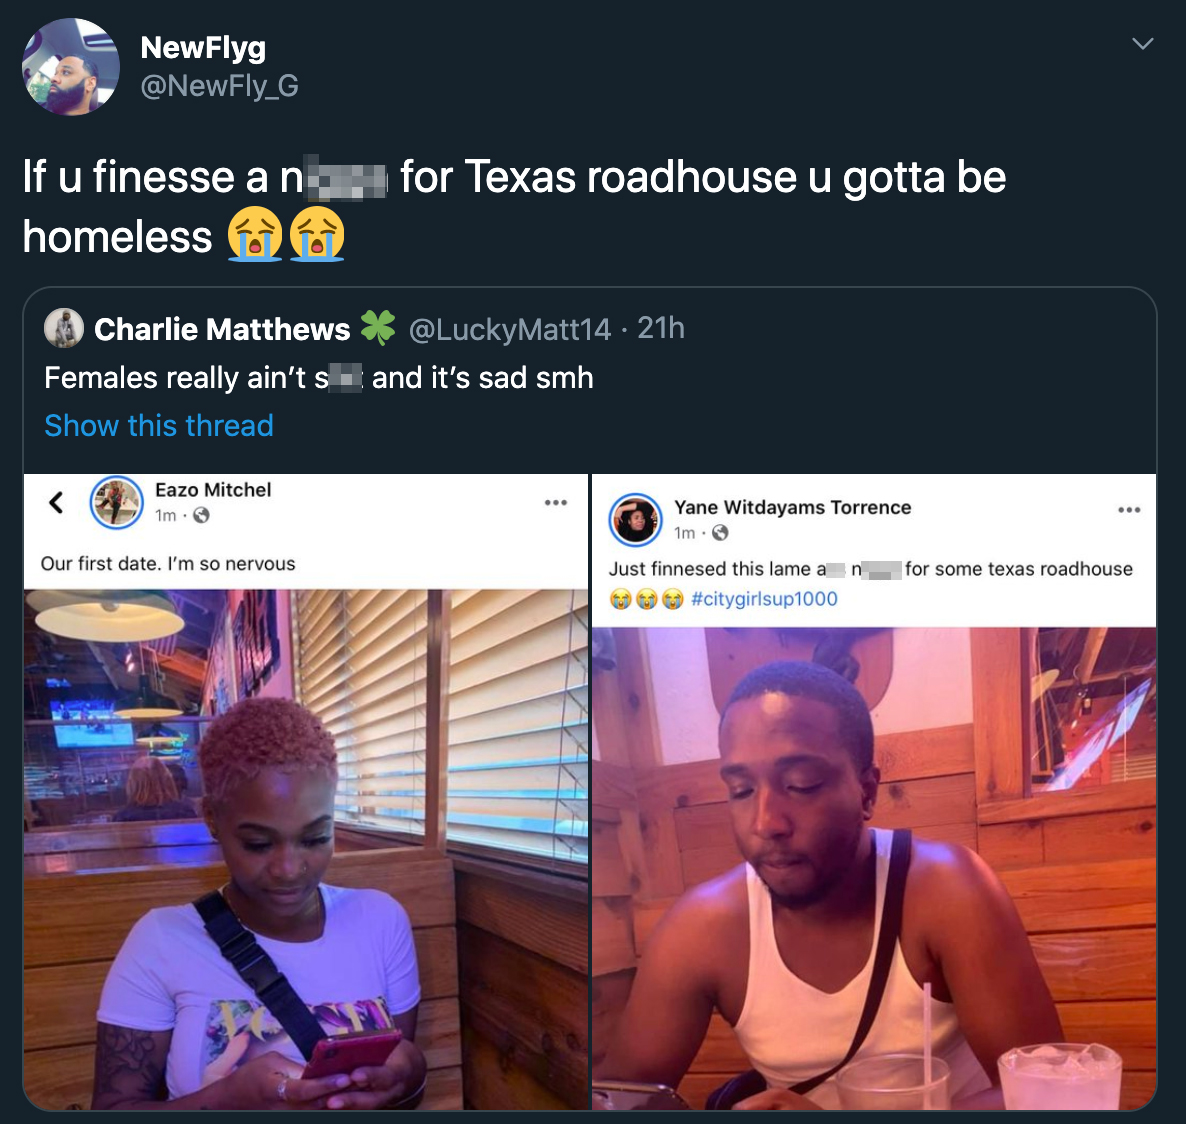 If u finesse a no homeless for Texas roadhouse u gotta be Charlie Matthews 21h Females really ain't sand it's sad smh Show this thread Eazo Mitchel Our first date. I'm so nervous Yane Witdayams Torrence im. Just finnesed this lame for some